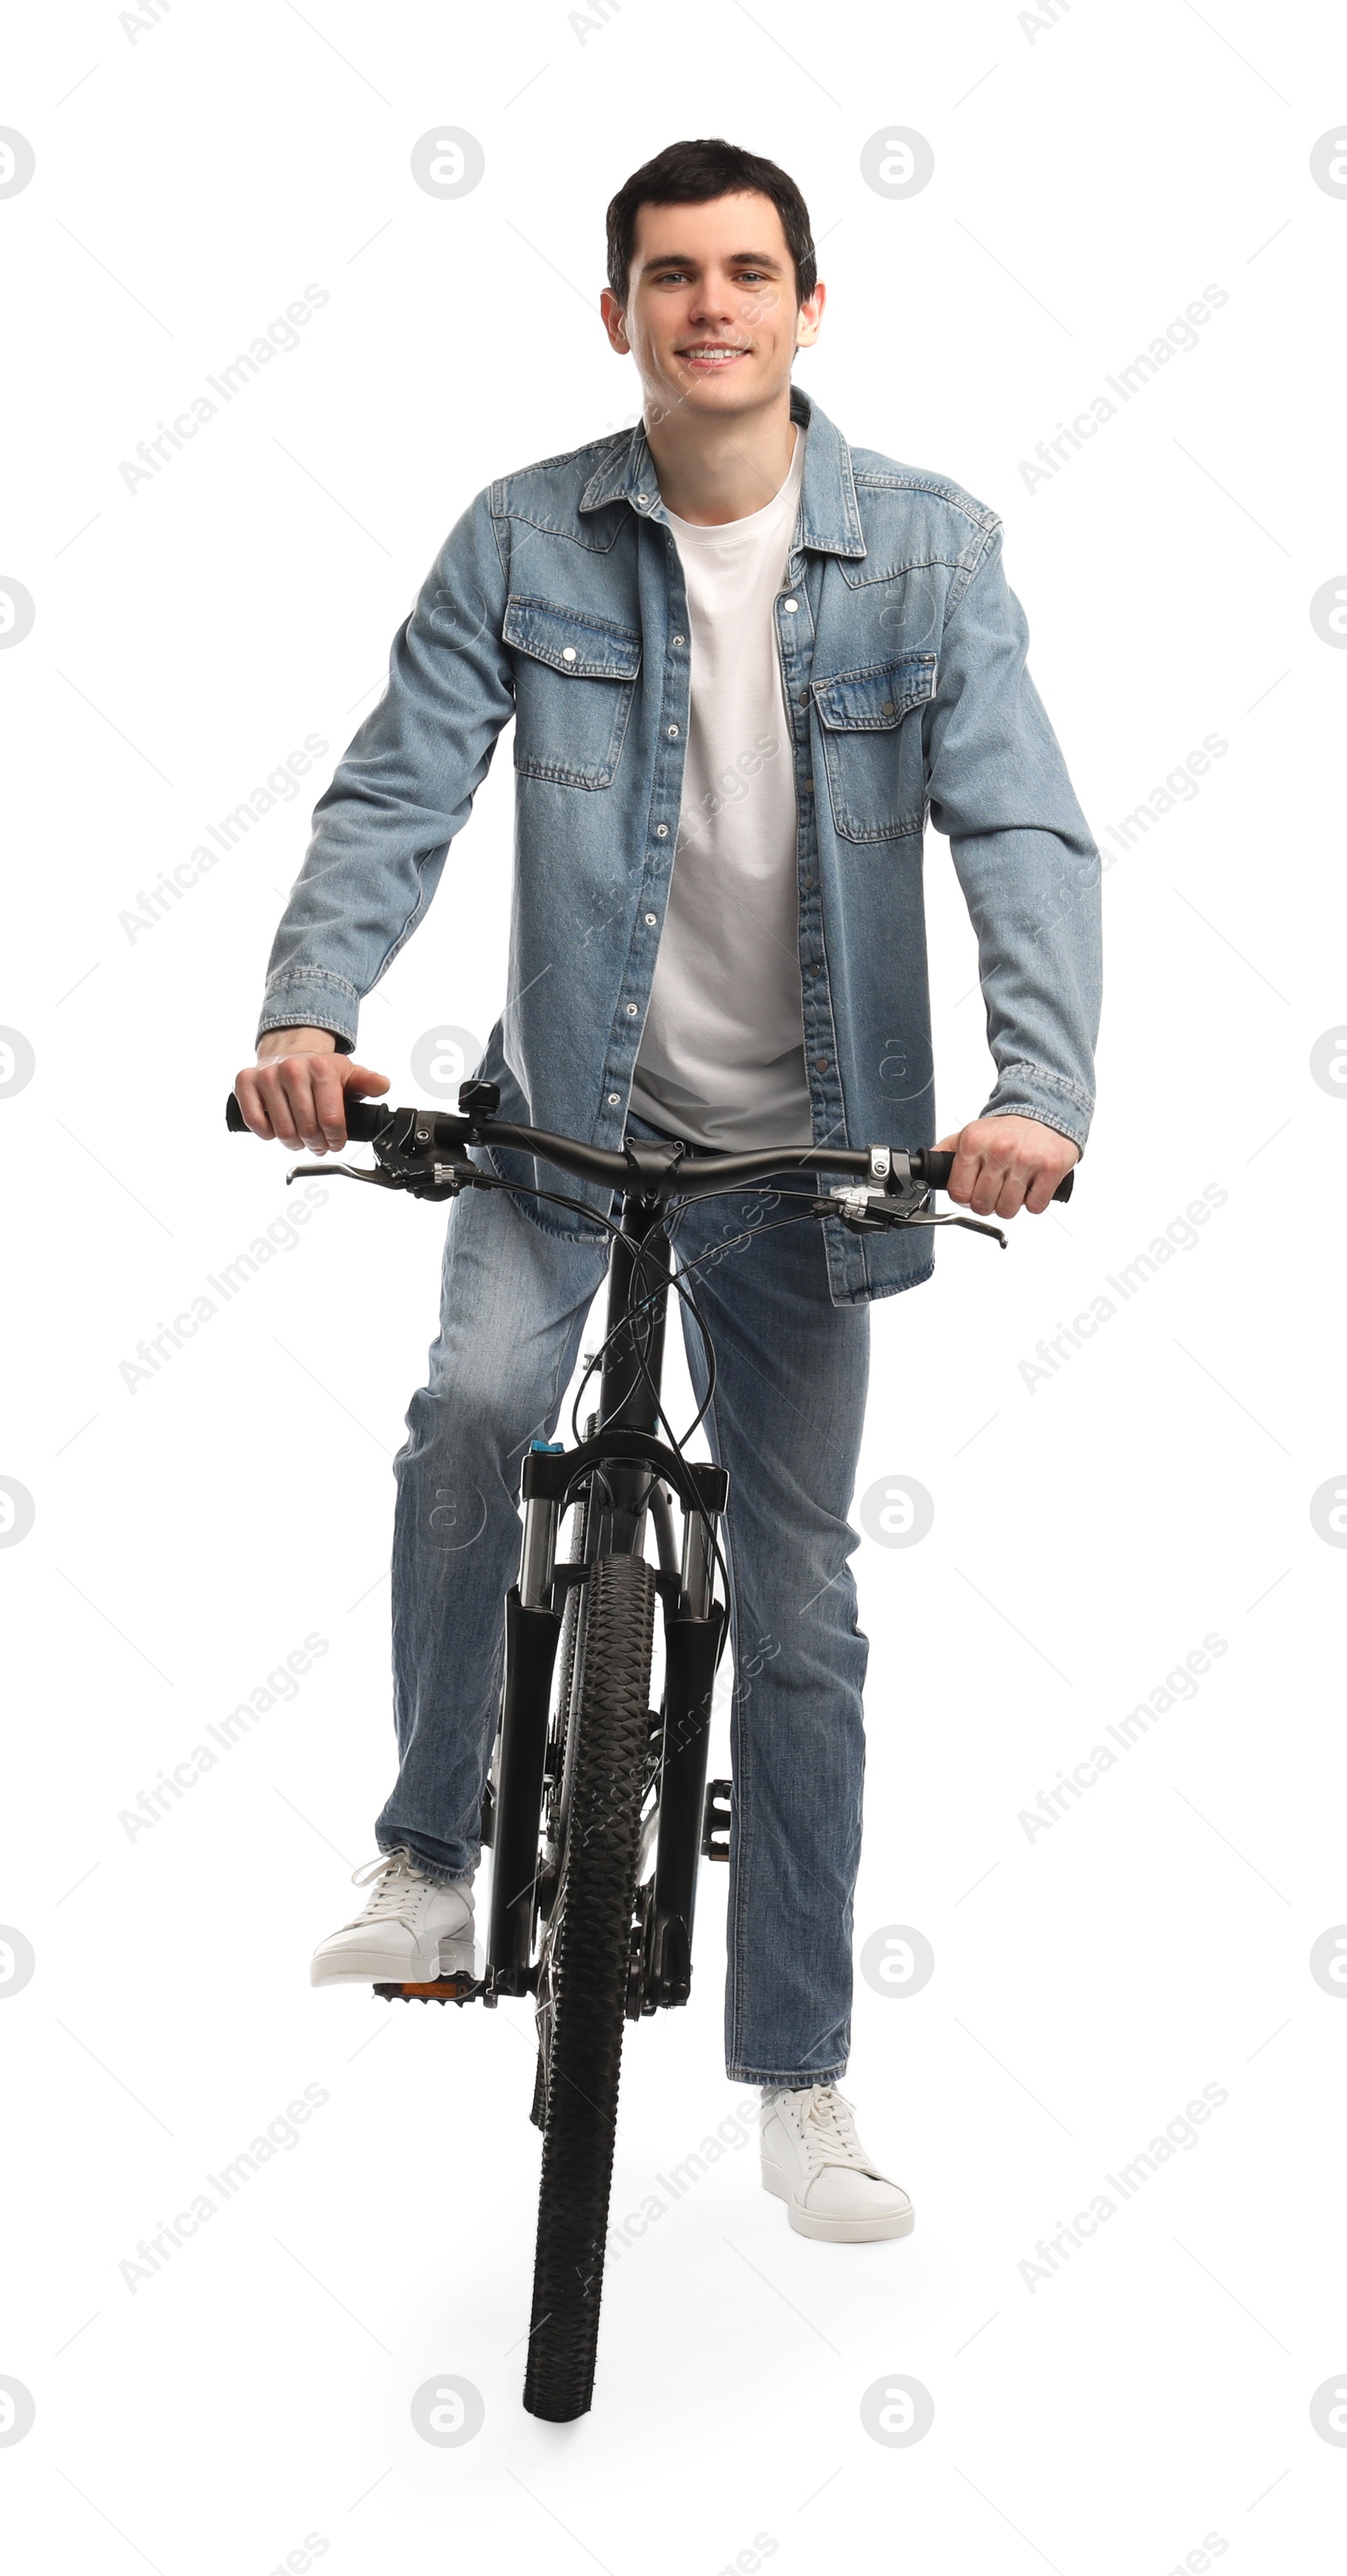 Photo of Smiling man riding bicycle on white background